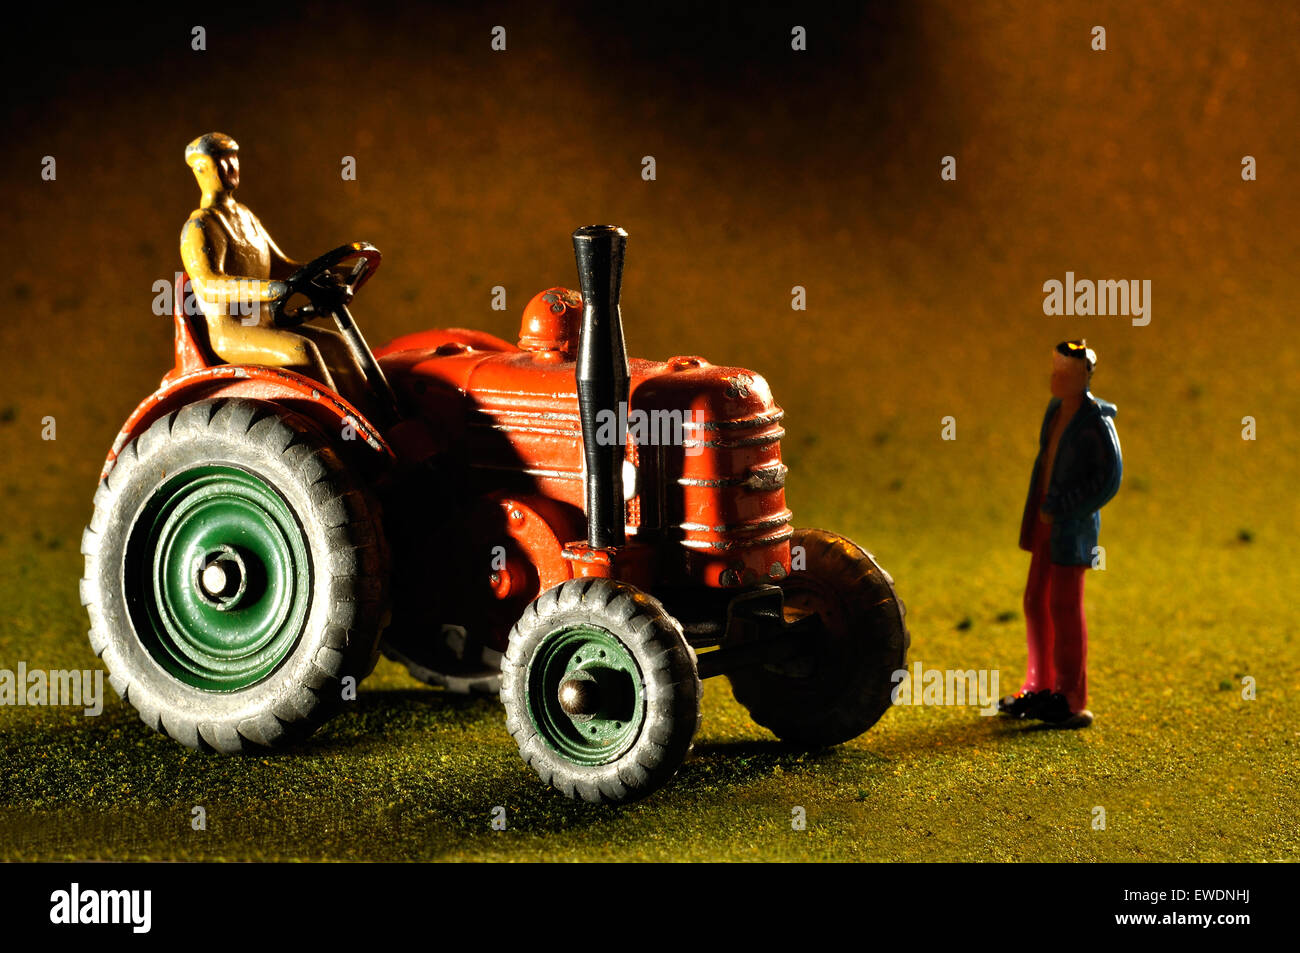 Vintage model Field marshall tractor with miniature figure in studio setting Stock Photo